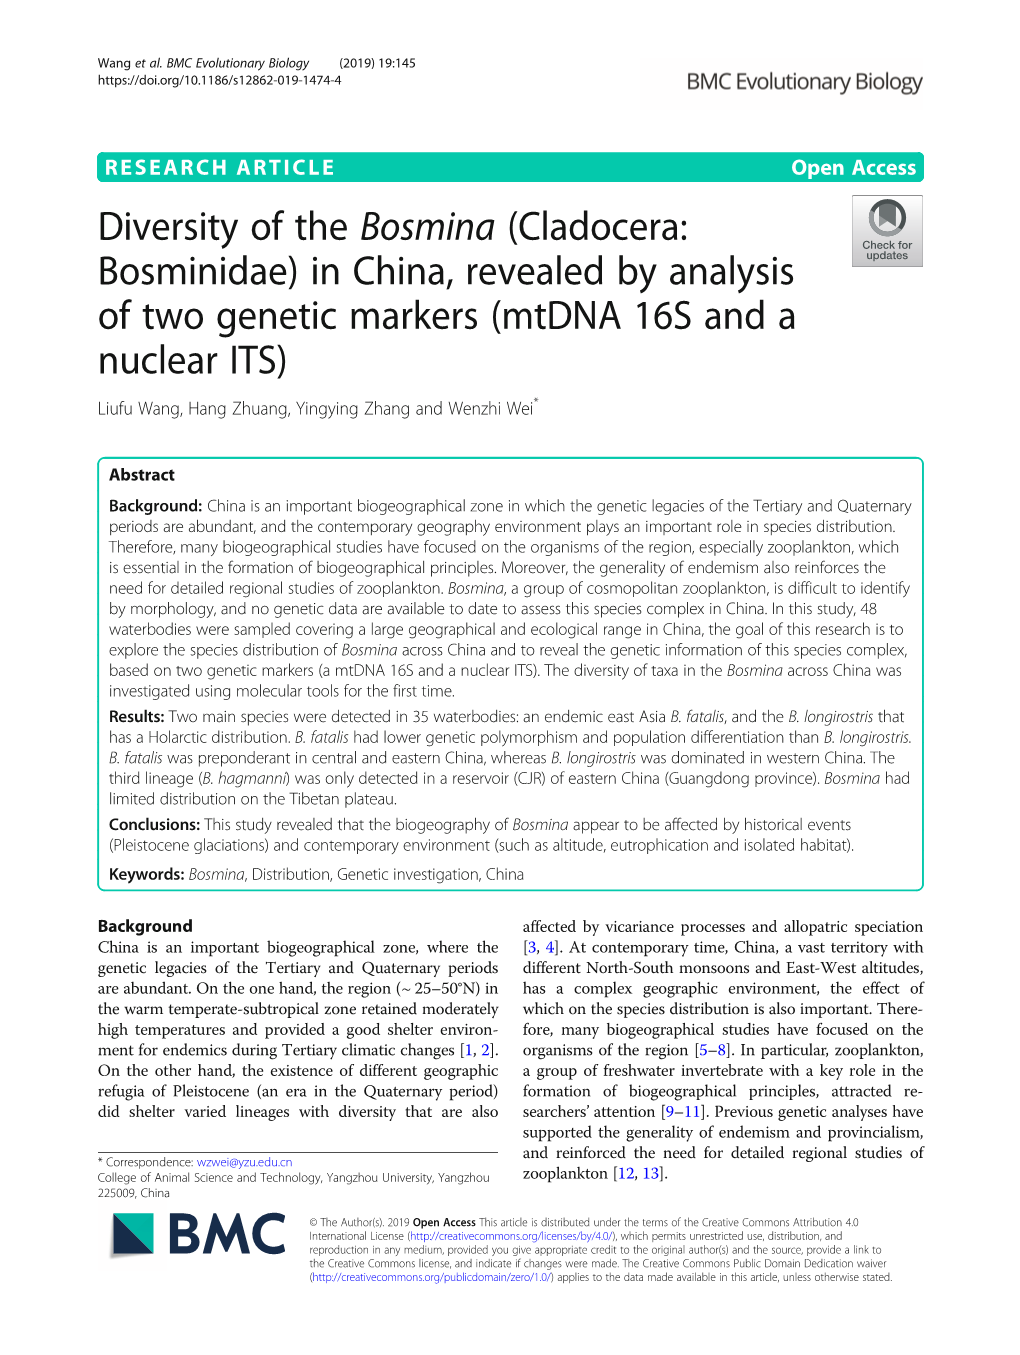 Diversity of the Bosmina (Cladocera: Bosminidae) in China, Revealed by Analysis of Two Genetic Markers (Mtdna 16S and a Nuclear